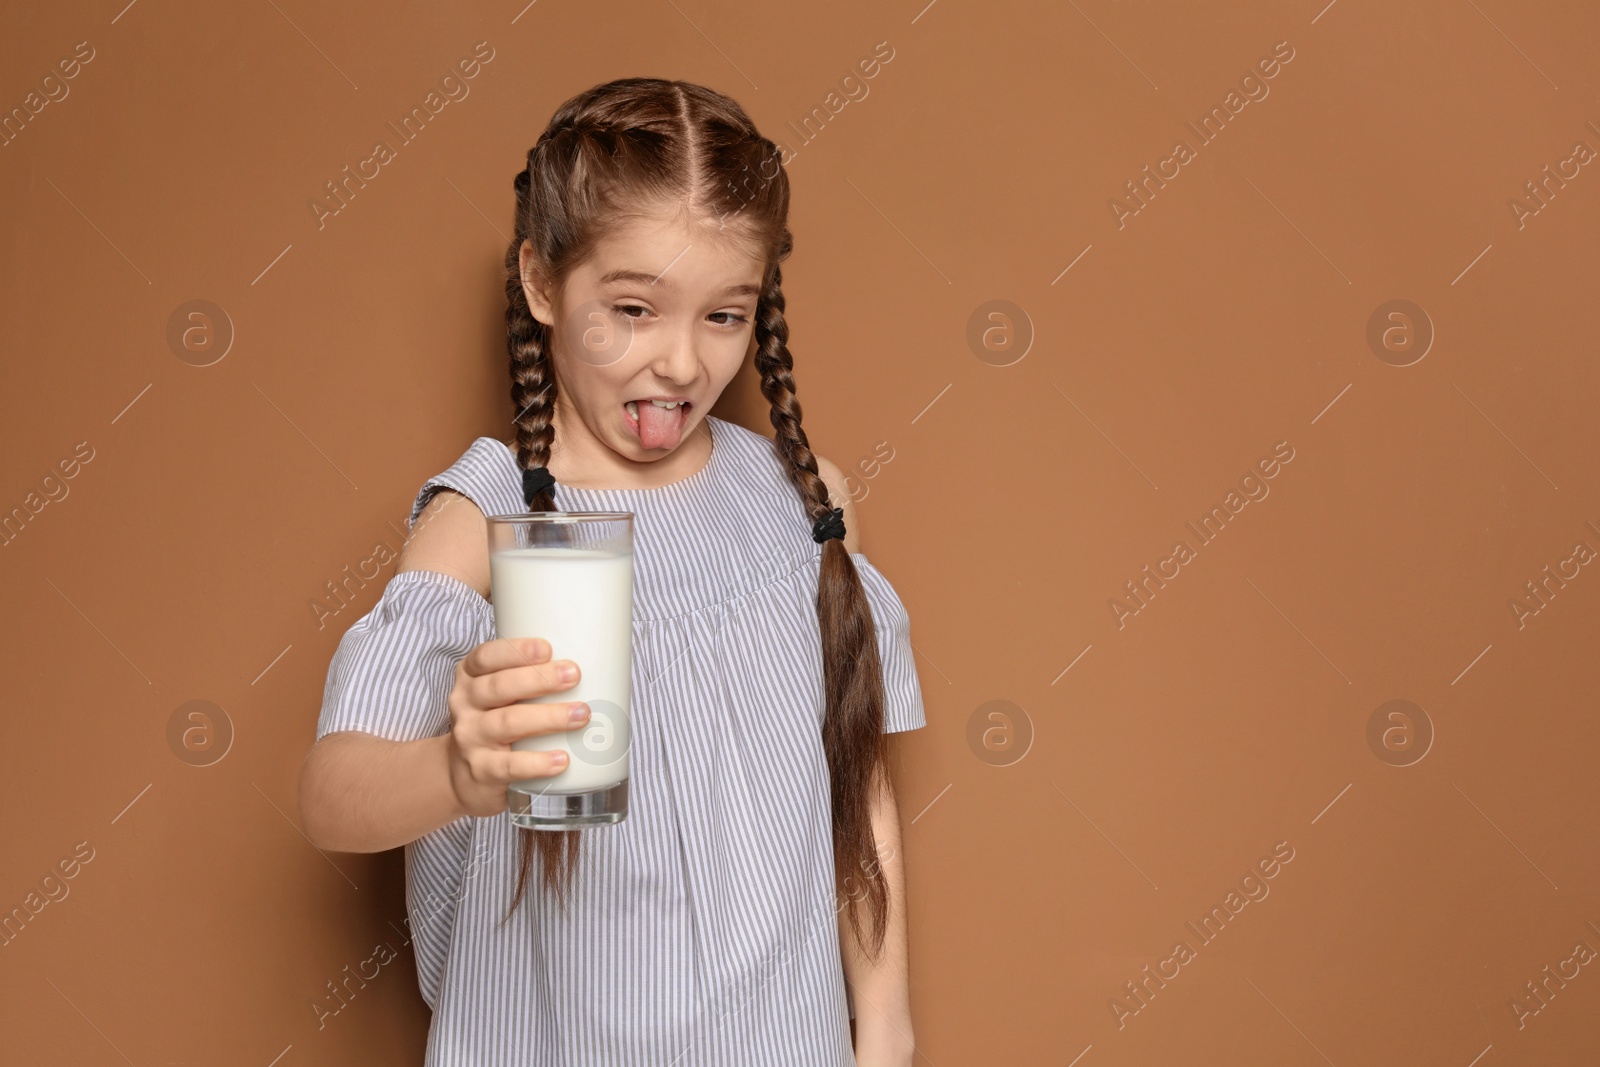 Photo of Little girl with dairy allergy holding glass of milk on color background